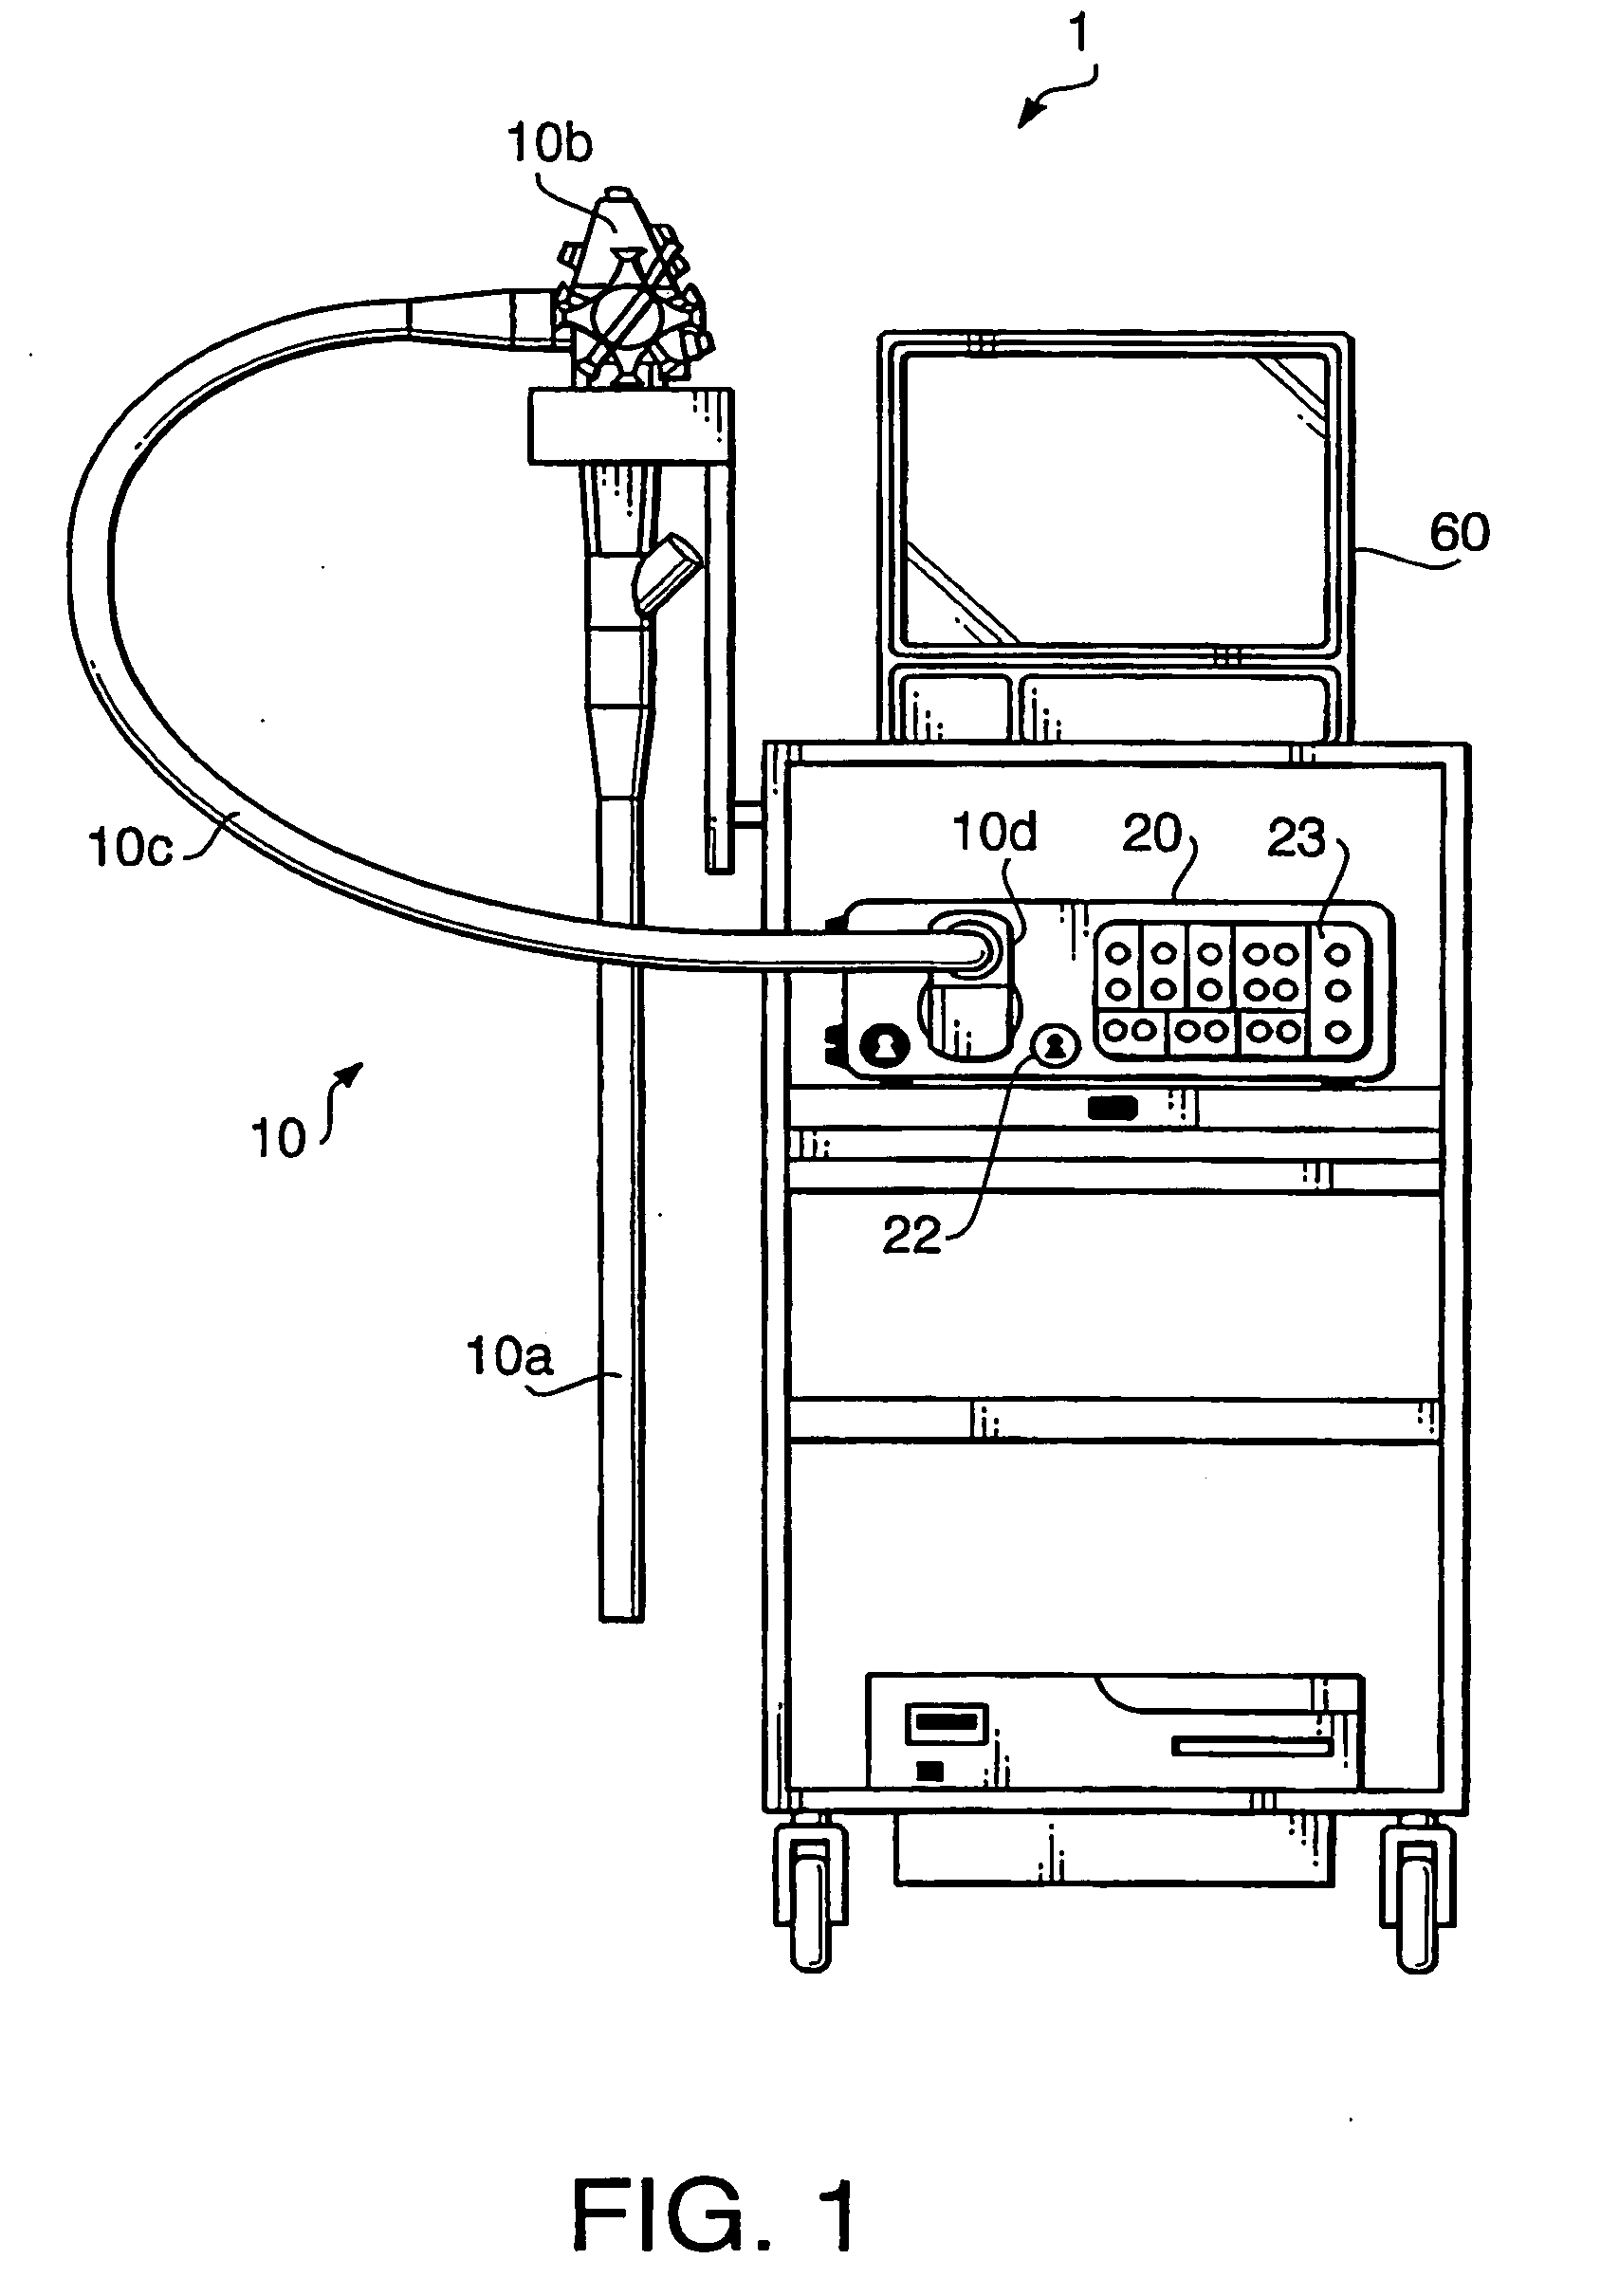 Electronic endoscope system for fluorescence observation